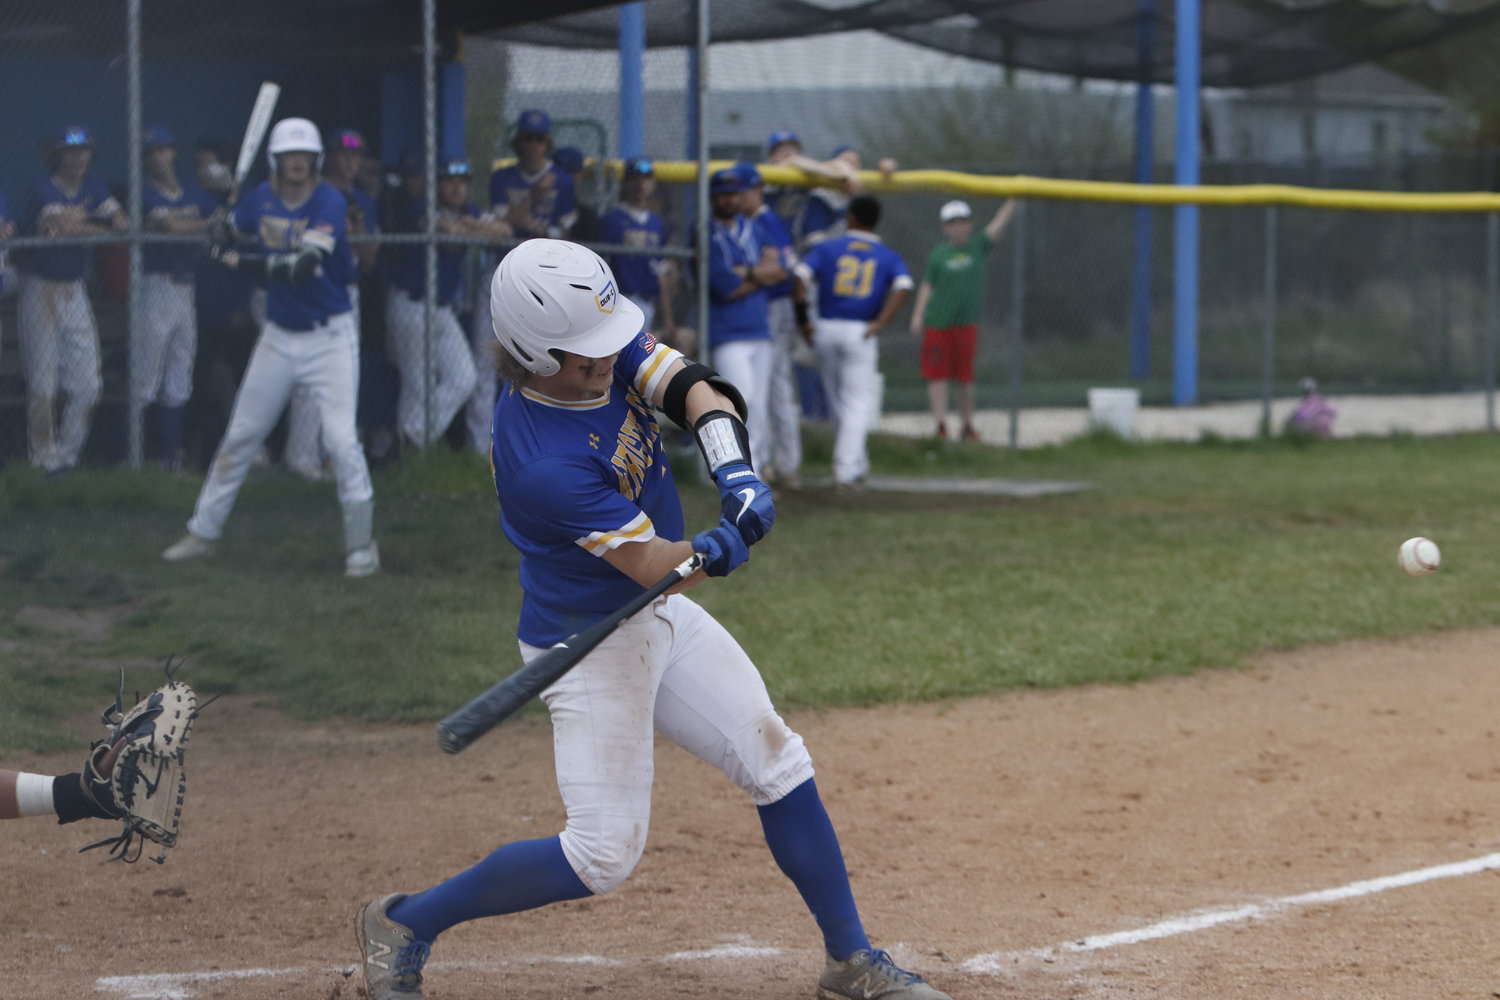 Hayden Waters swings at a pitch in a game earlier this season.